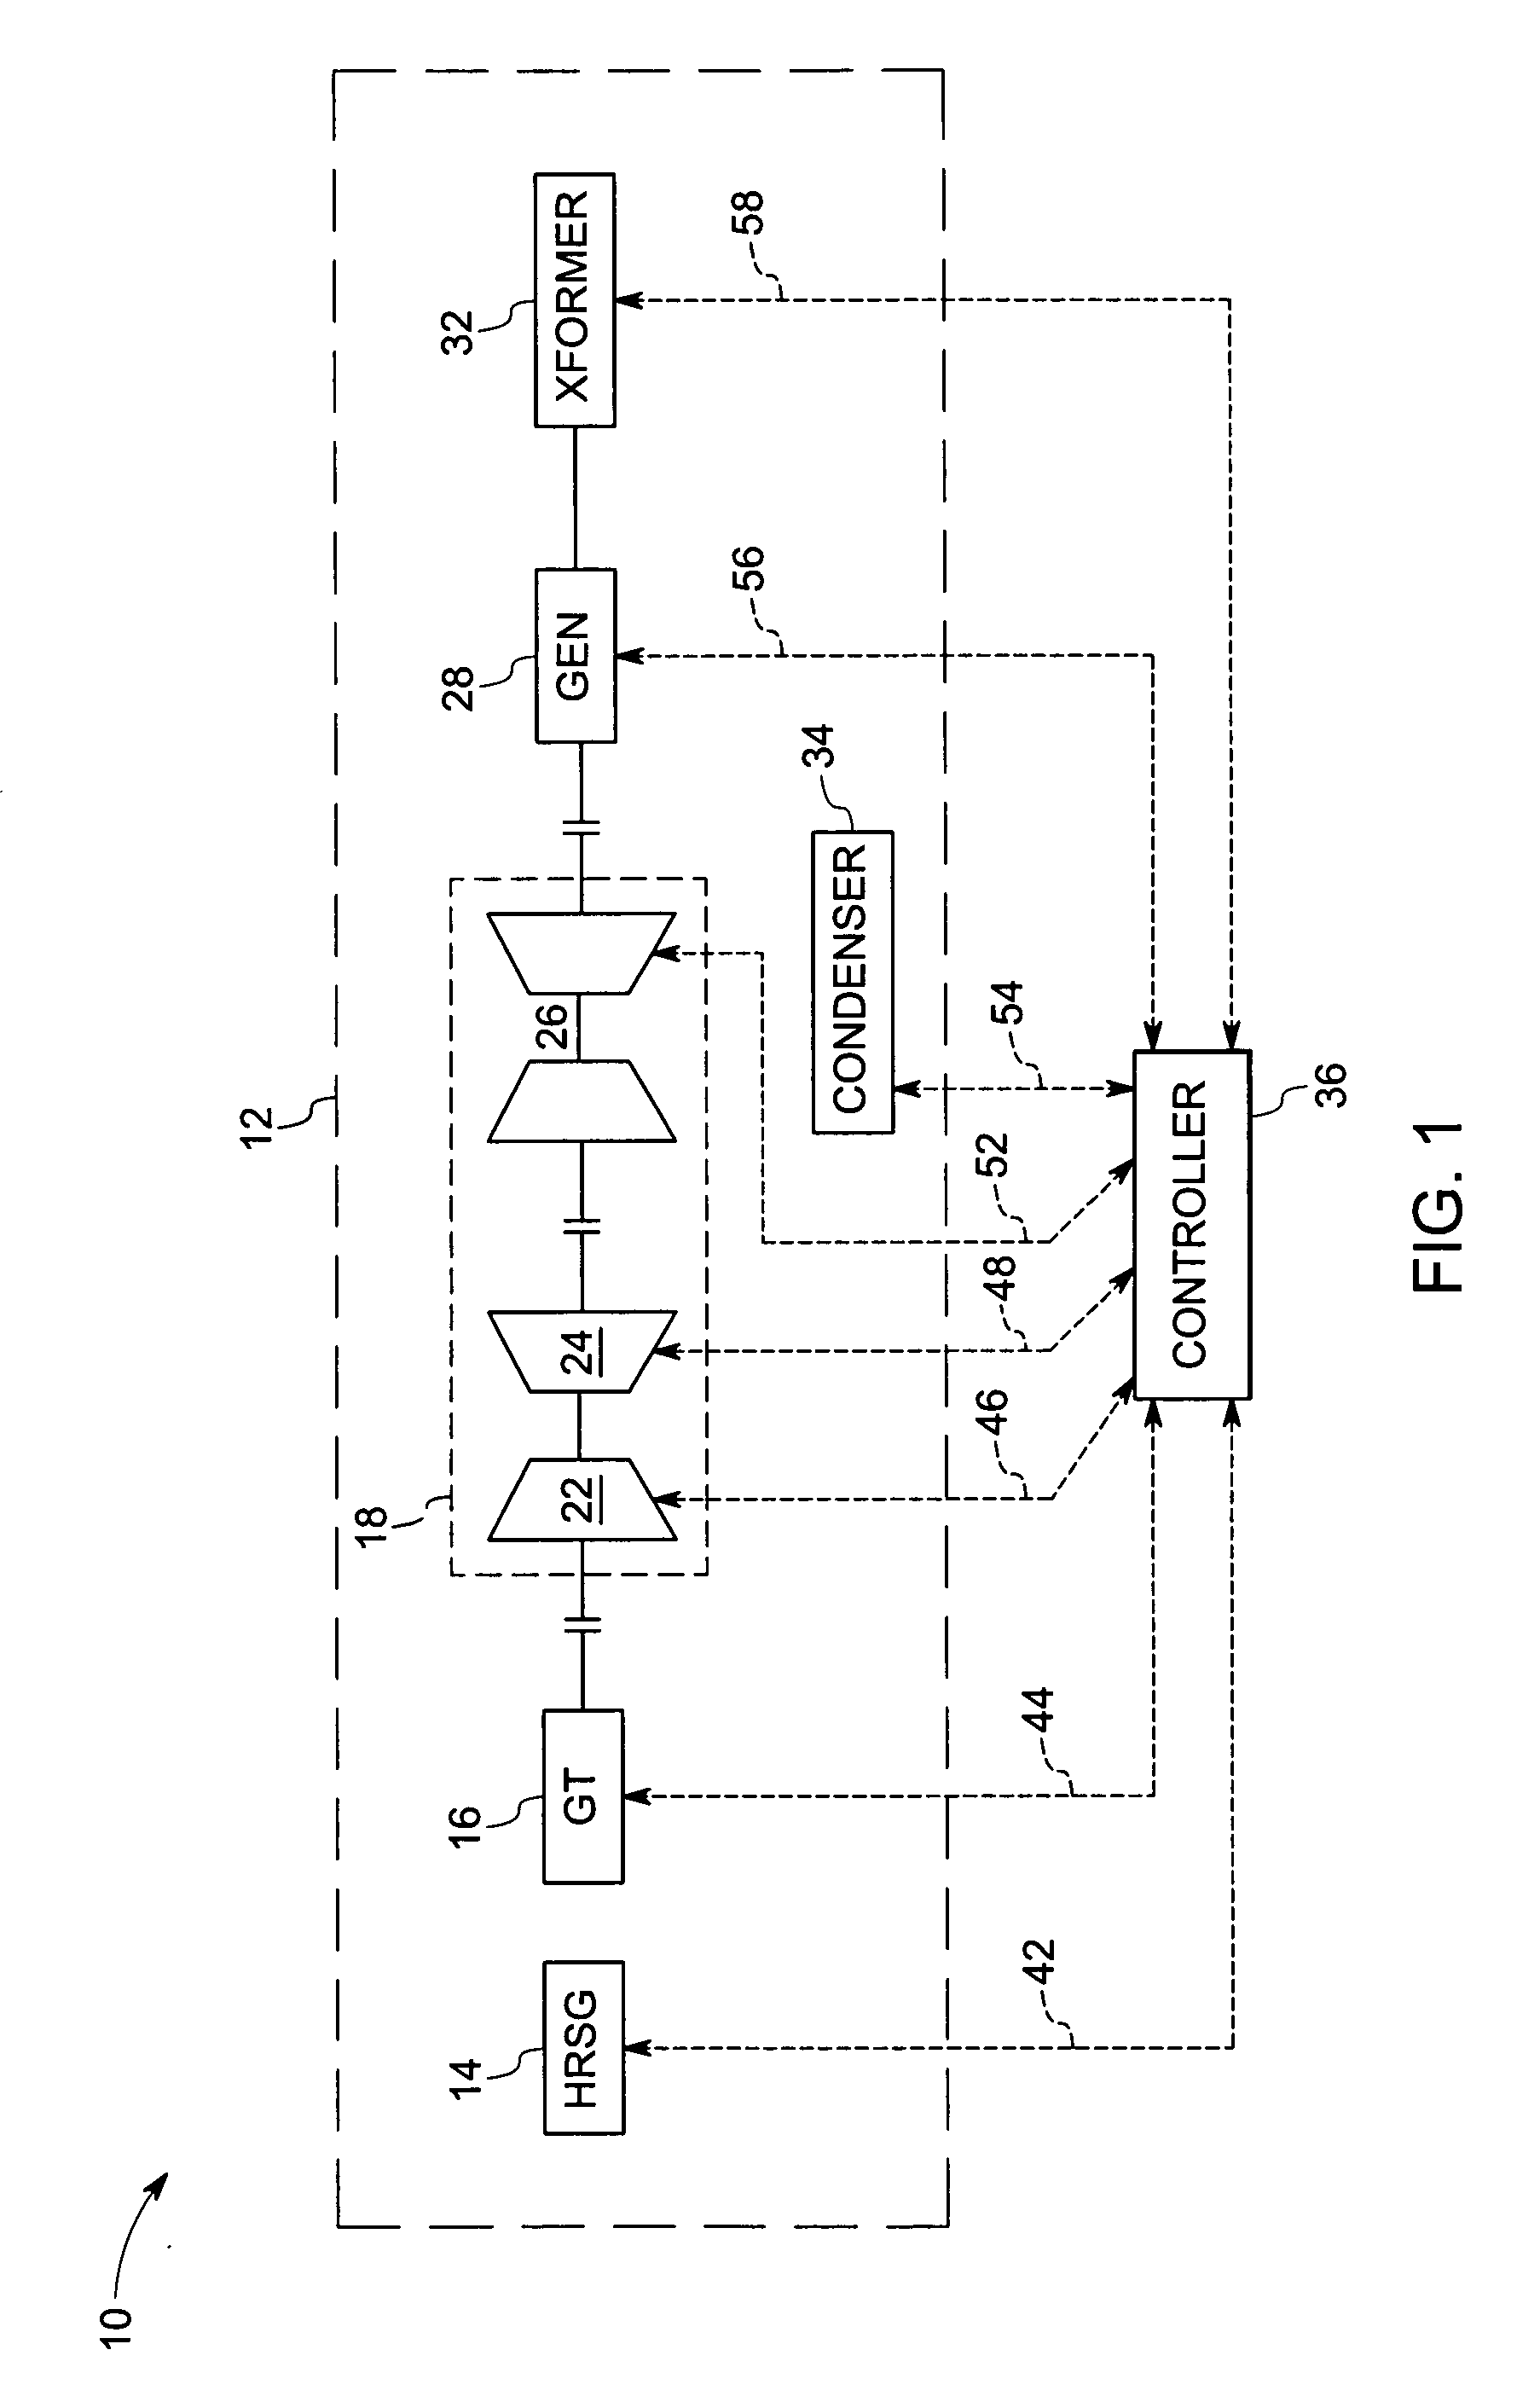 Method and system for model predictive control of a power plant